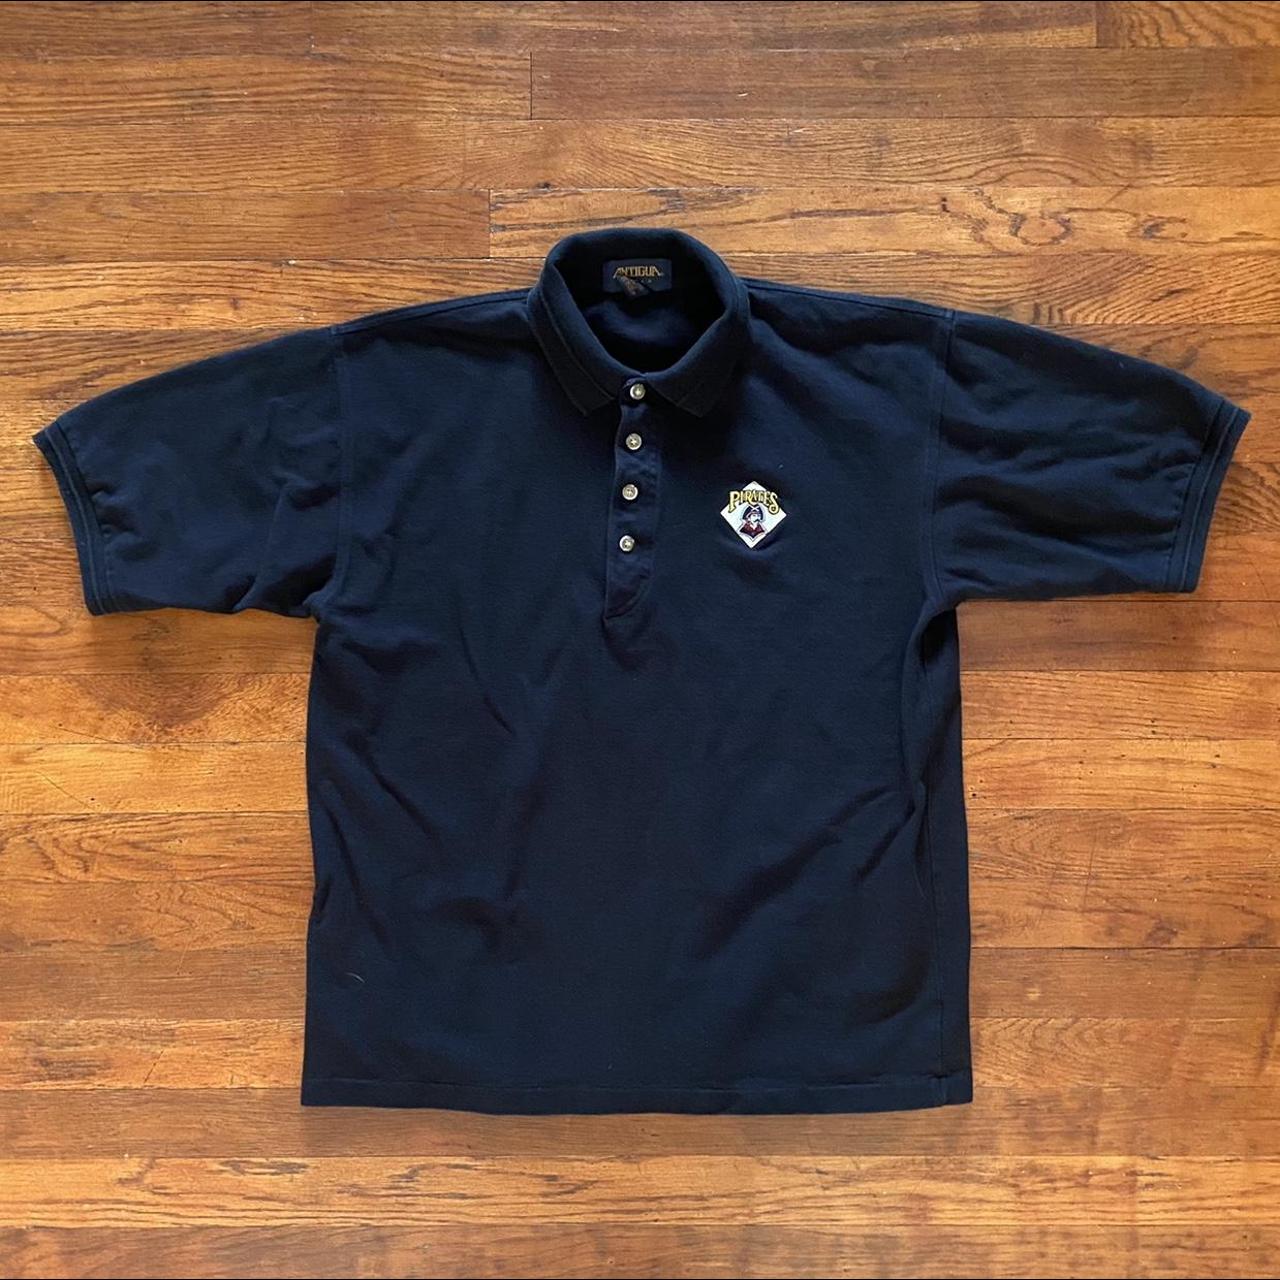 Pittsburgh Pirates Black Yellow Antigua Polo Golf Shirt Large Excellent Cond